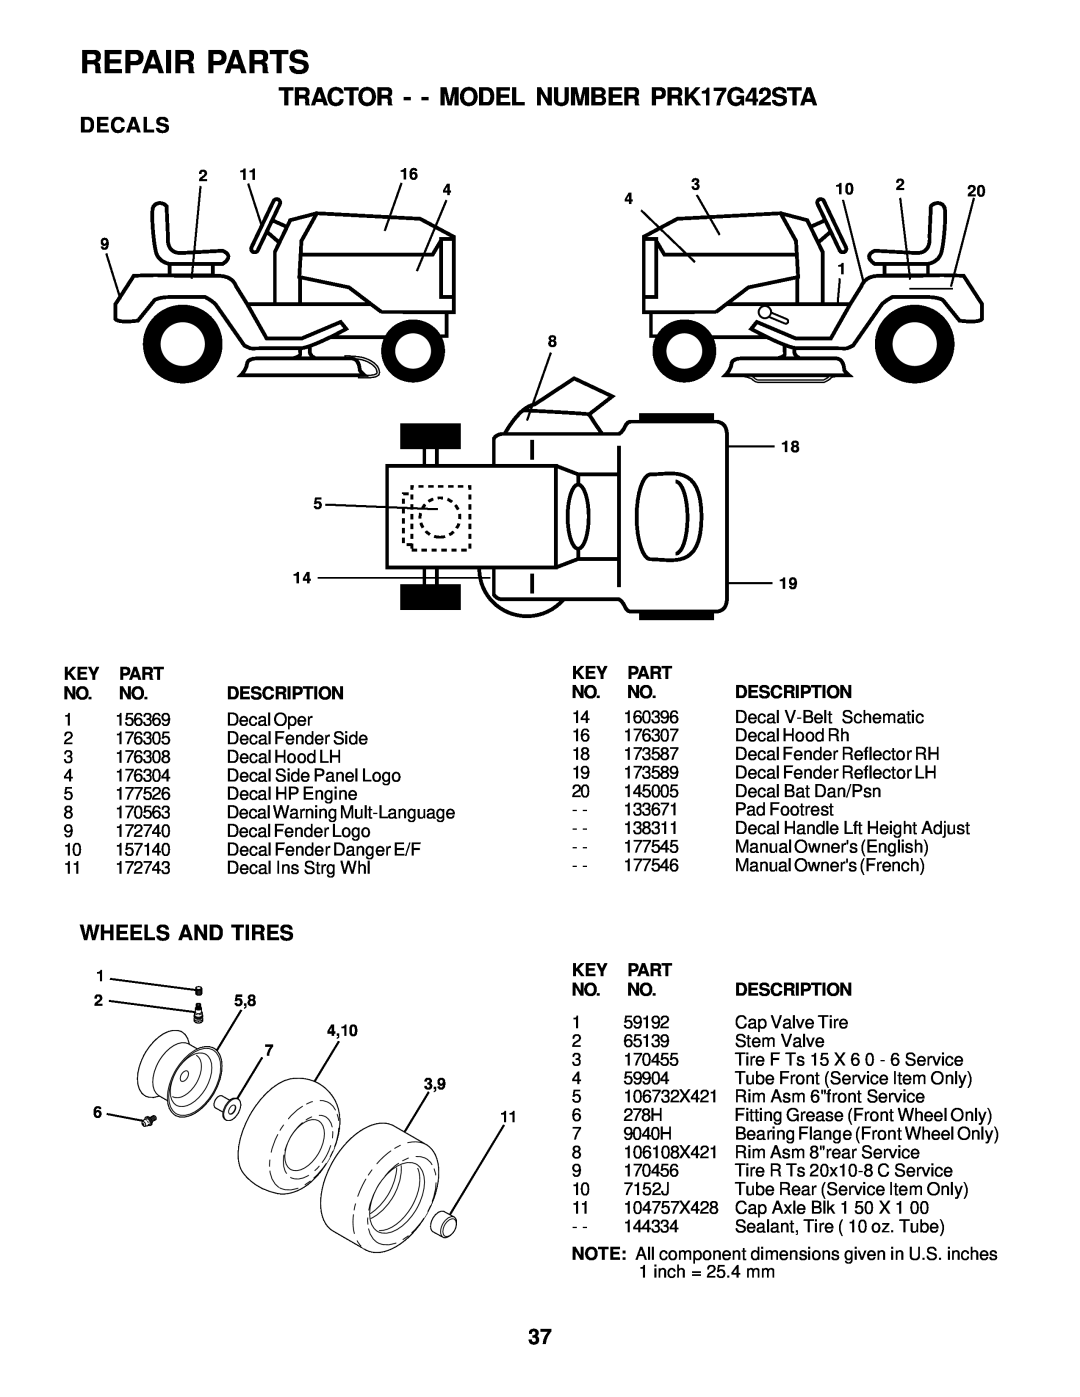 Poulan 177545 owner manual Decals, Wheels And Tires, Repair Parts, TRACTOR - - MODEL NUMBER PRK17G42STA 